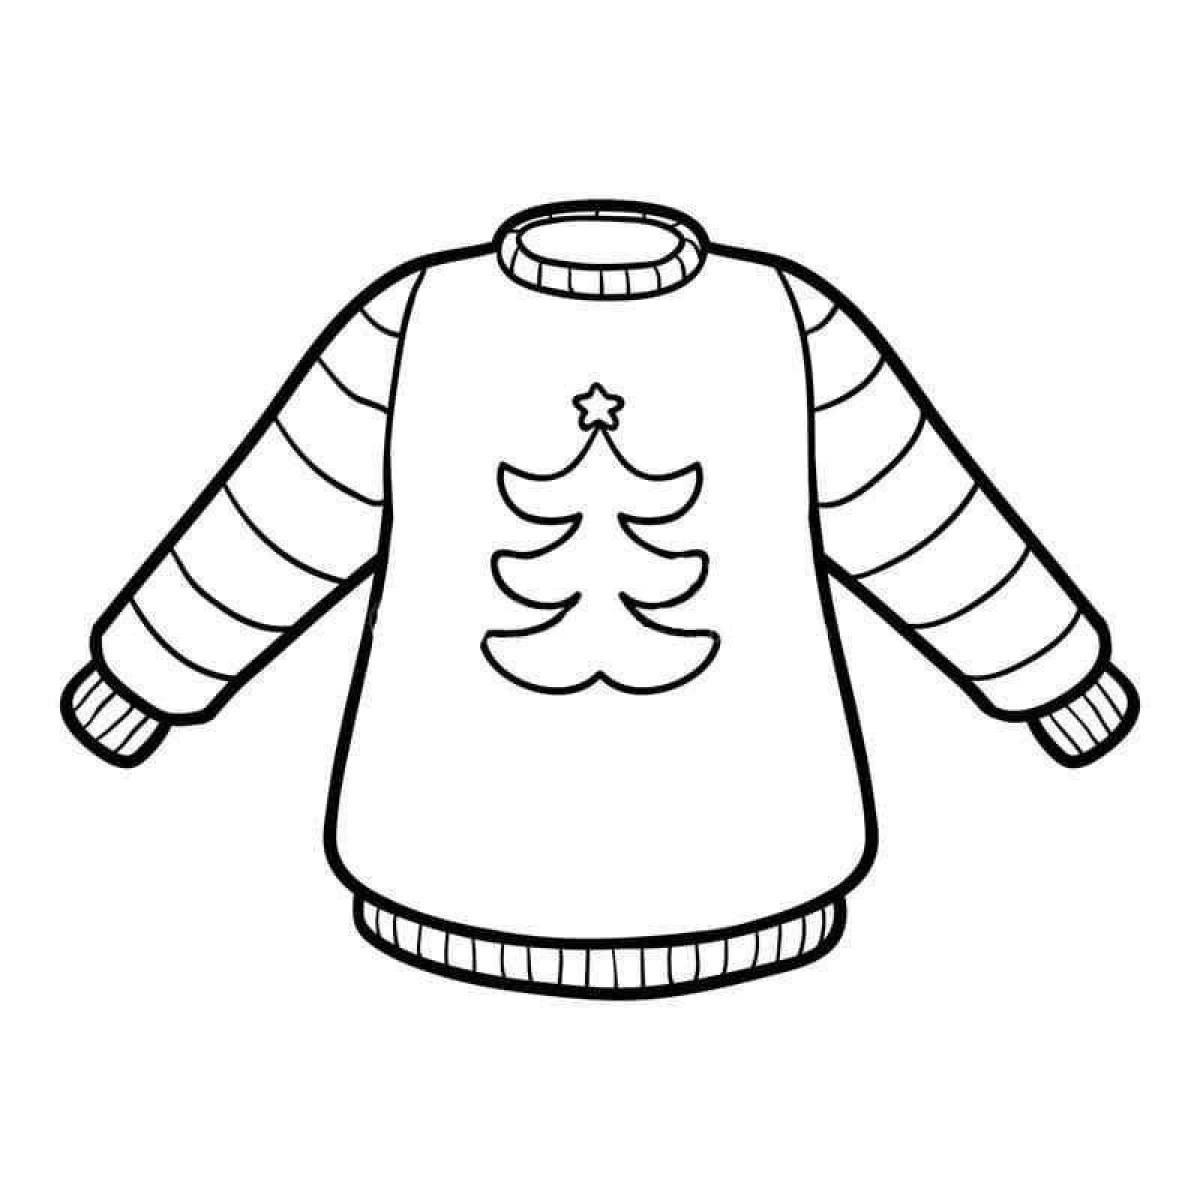 Coloring page funny sweater for children 4-5 years old